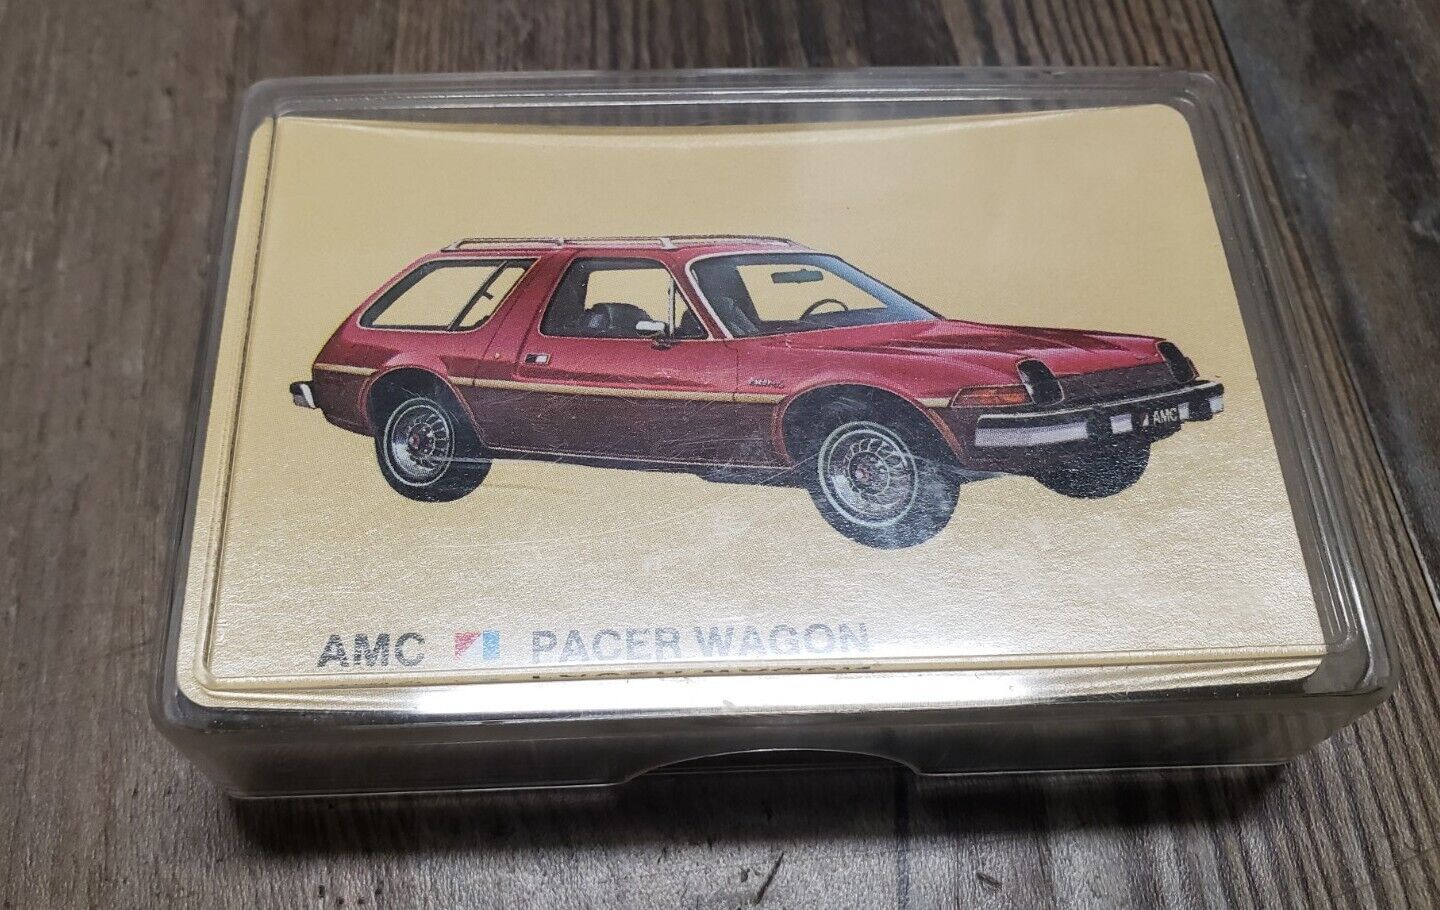 AMC 1977 1978 1979 Pacer Wagon playing cards poker nos